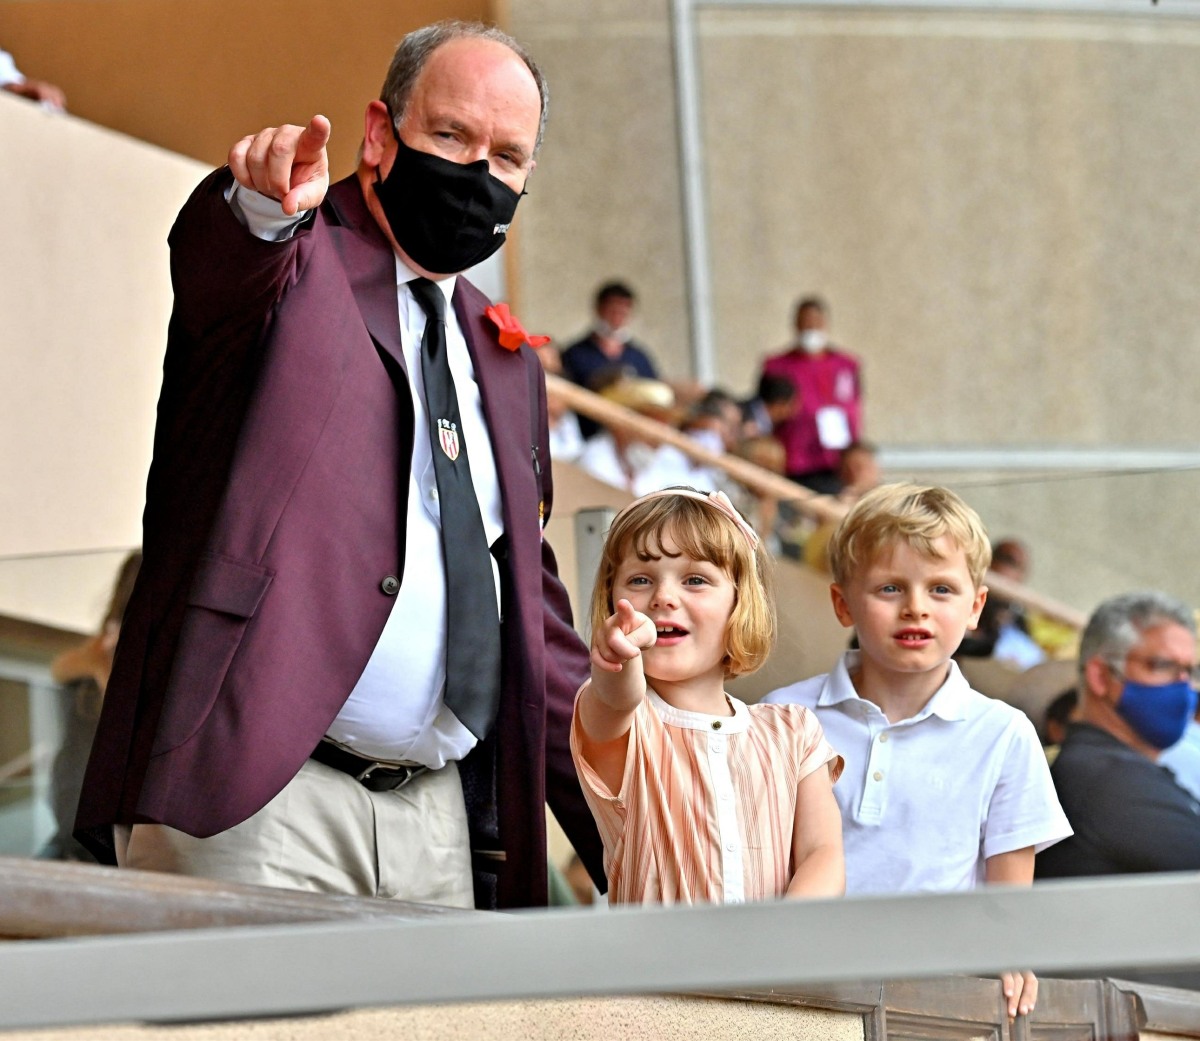 Prince Albert II of Monaco during the last day of the World Rugby Sevens Repechage tournament